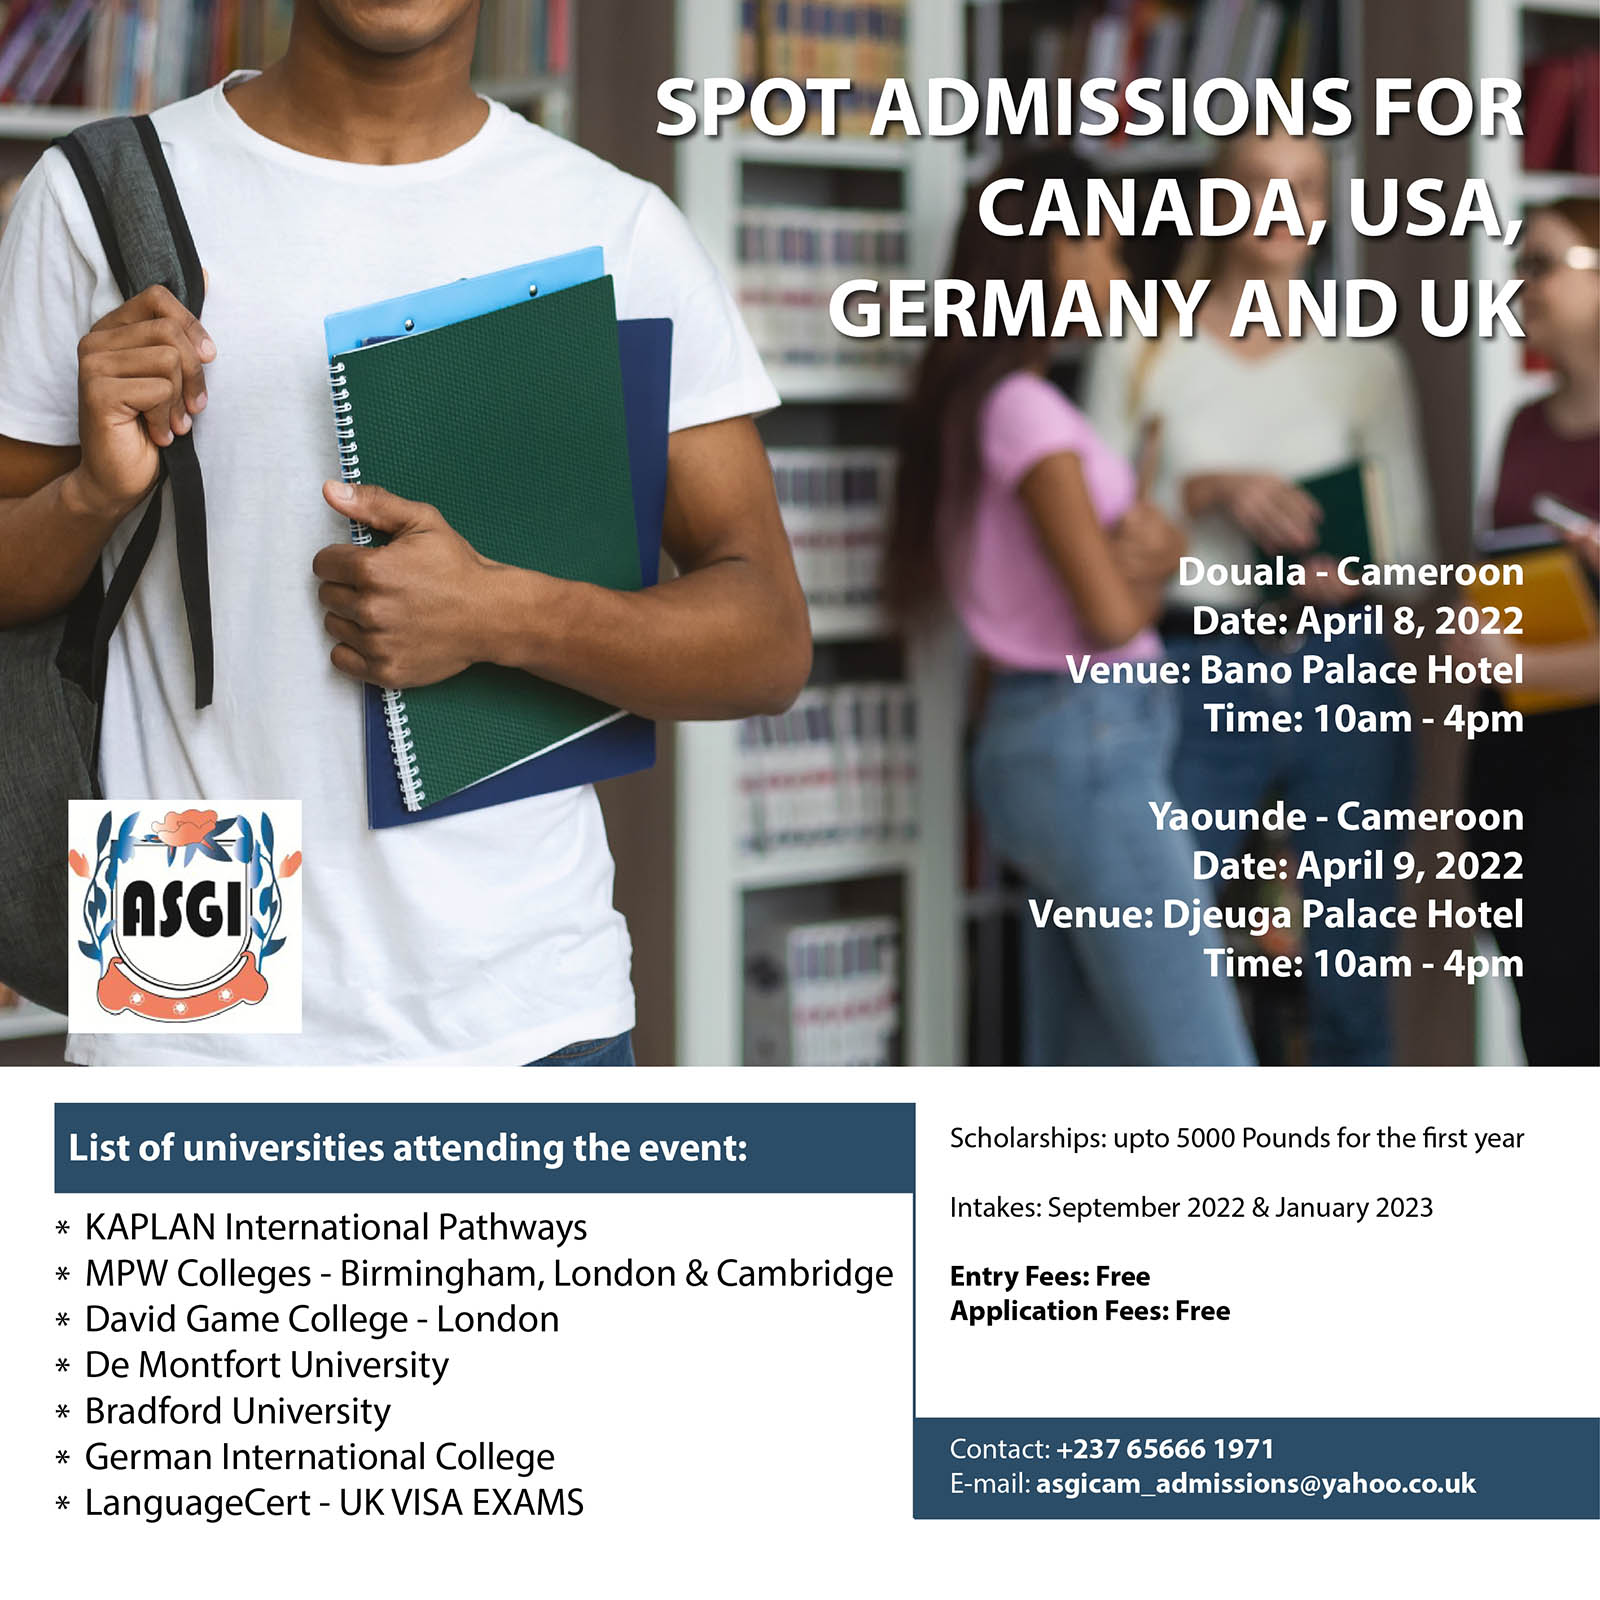 Spots admission for Canada, USA, Germany & UK